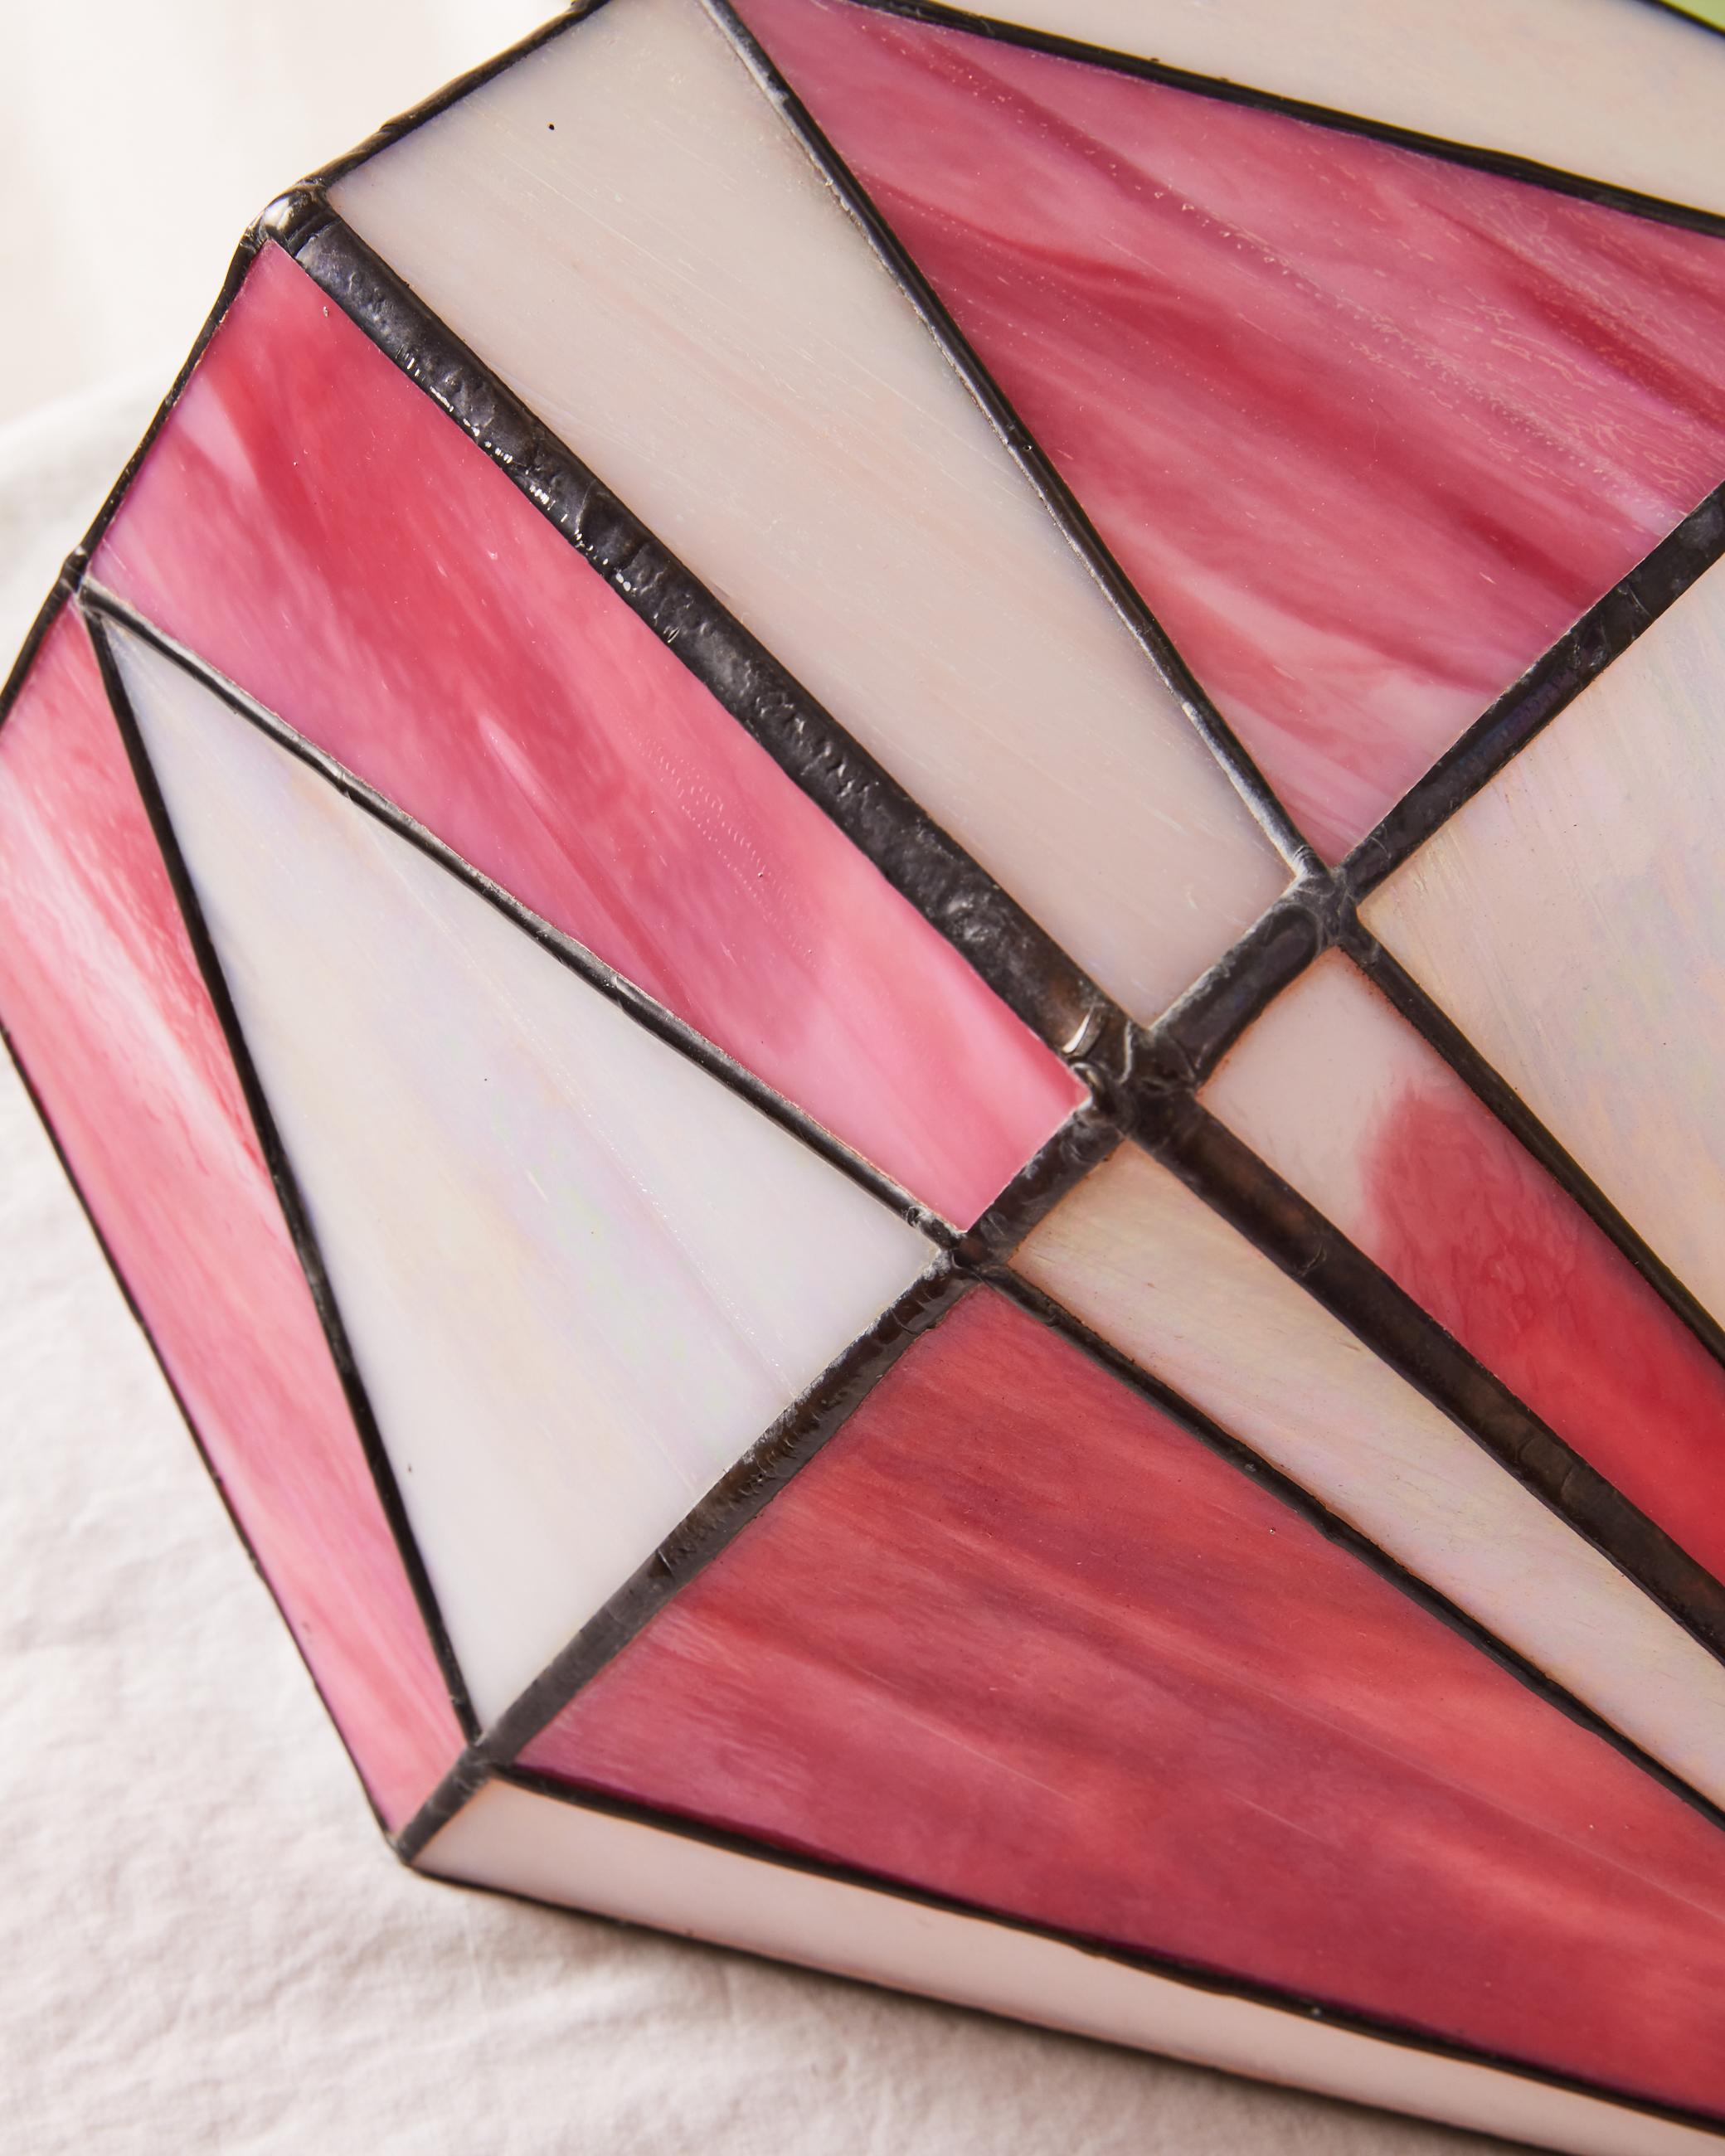 Handcrafted stained glass ceiling lamp with brass hardware, and decorative cloth covered  color cord with wall plug . Pink streaky and white glass. Ready to hang.  Multiples available but each one is slightly unique by the hand made nature.  Please